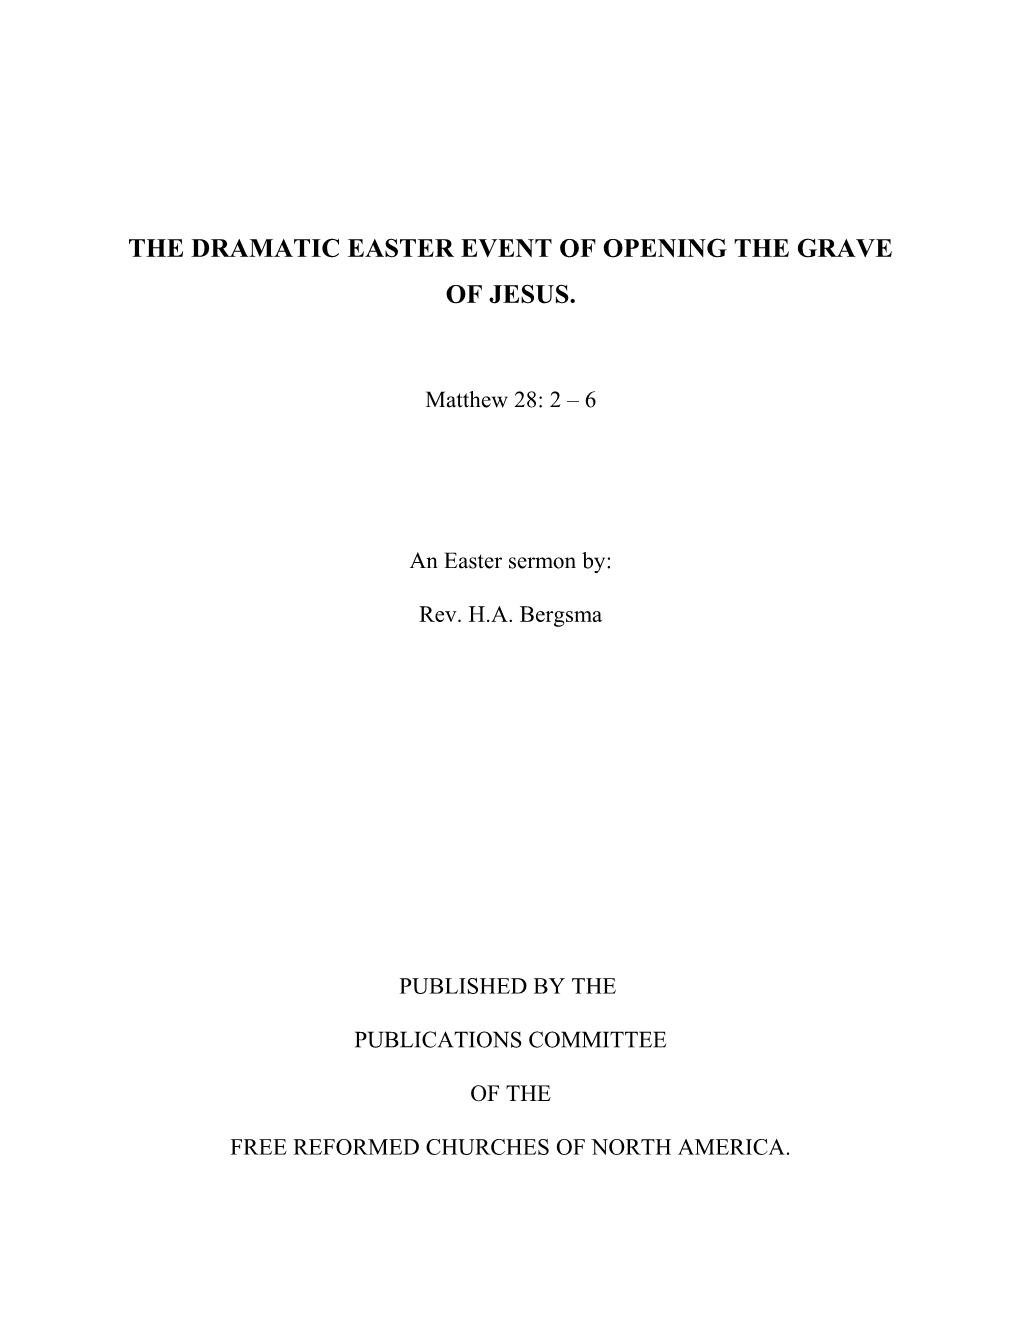 The Dramatic Easter Event of Opening the Grave of Jesus